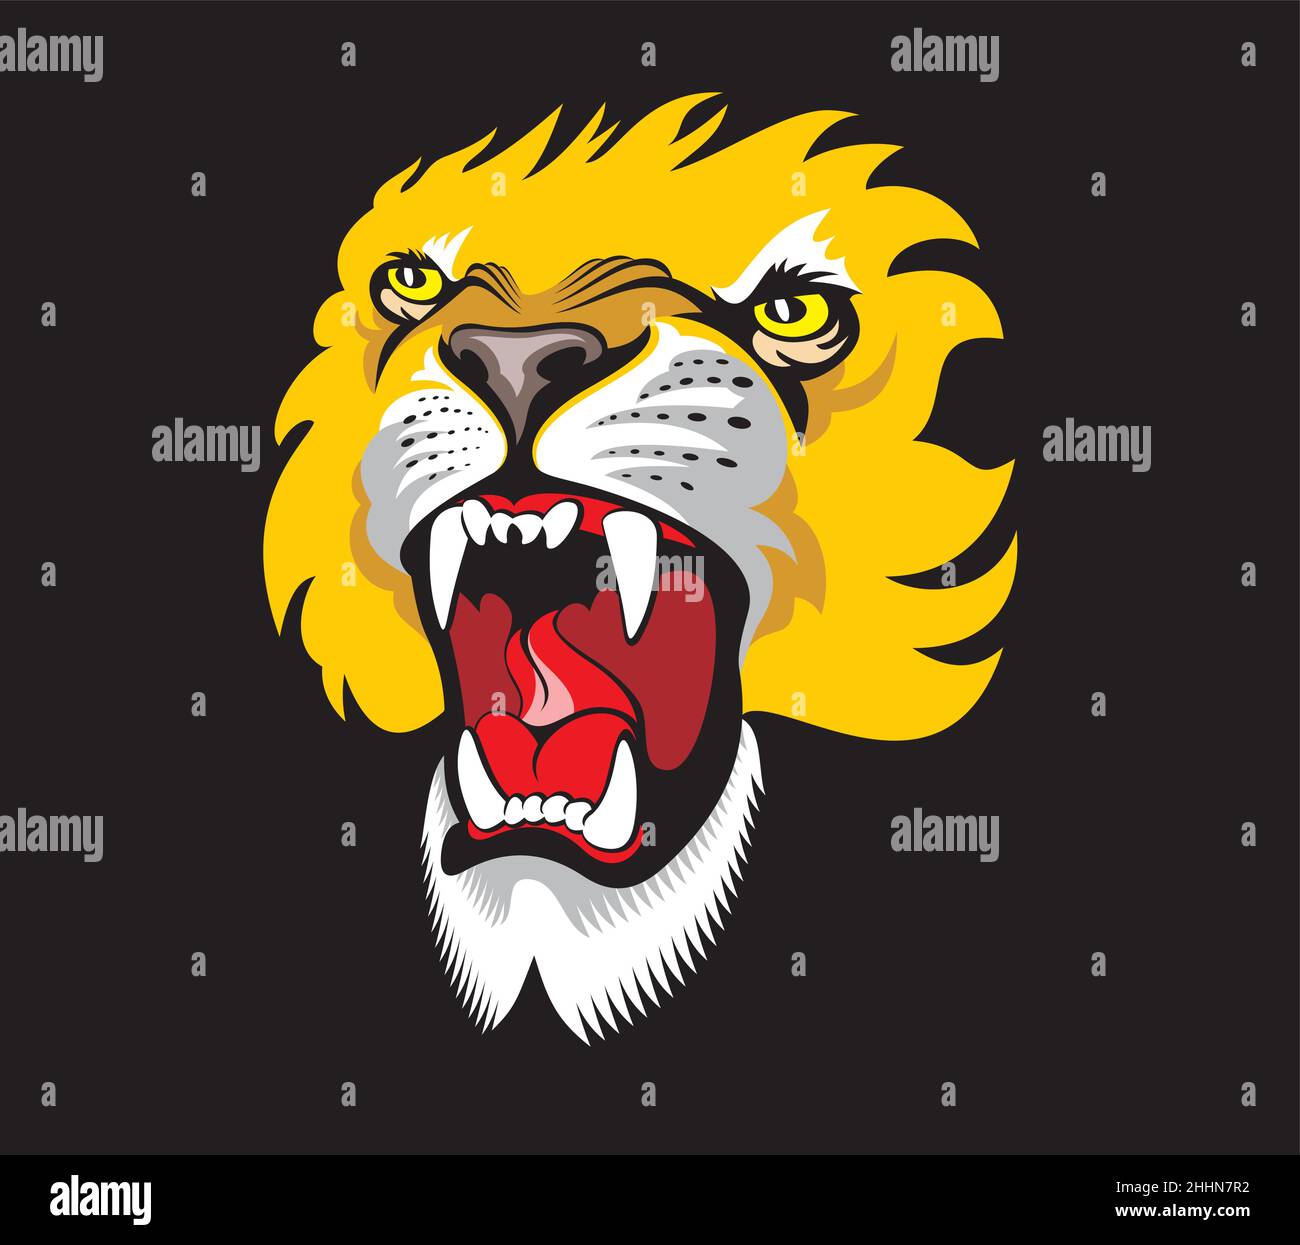 Gold roaring lion. Angry animal grinning face. Print on dark background Stock Vector